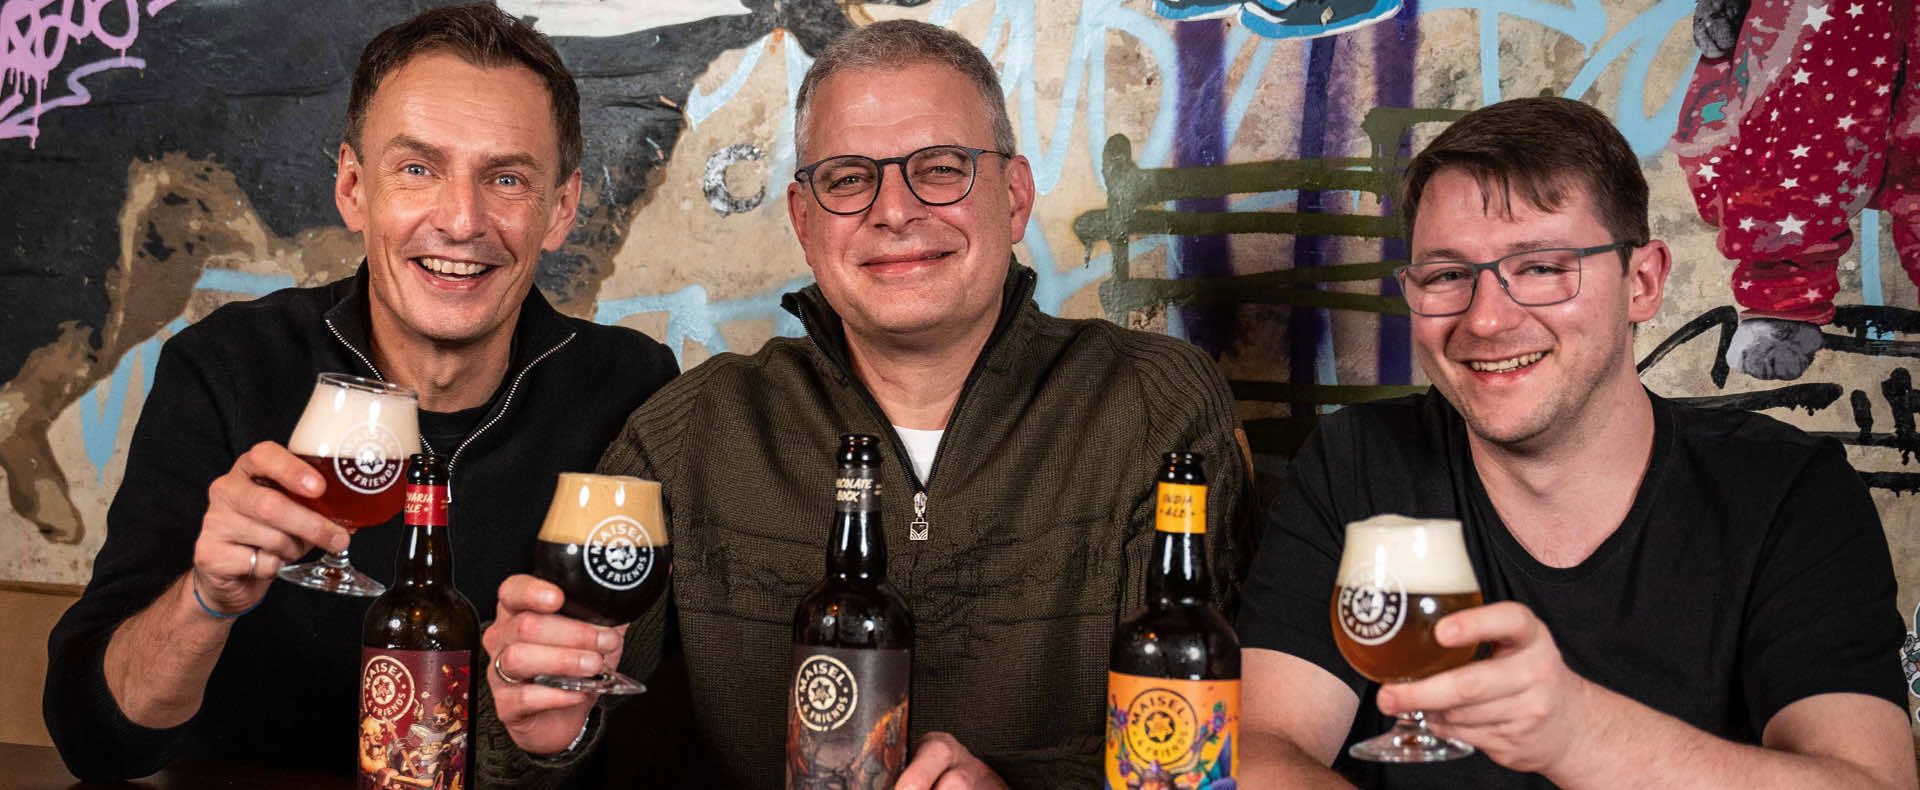 The signature beers from Maisel & Friends with their three beer patrons Jeff, Marc and Markus